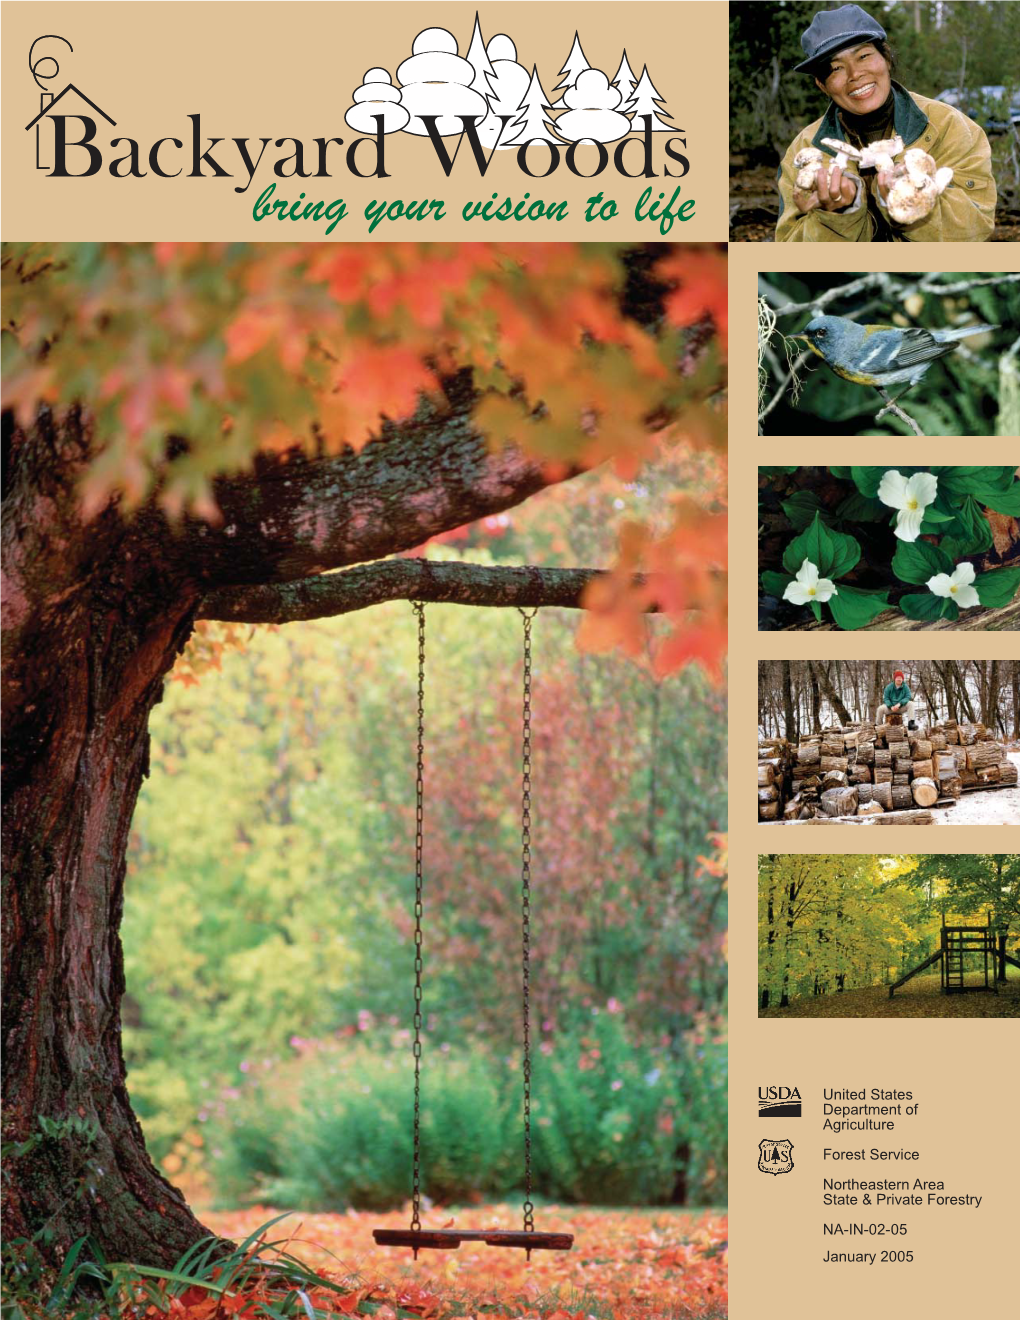 Backyard Woods -- Bring Your Vision to Life